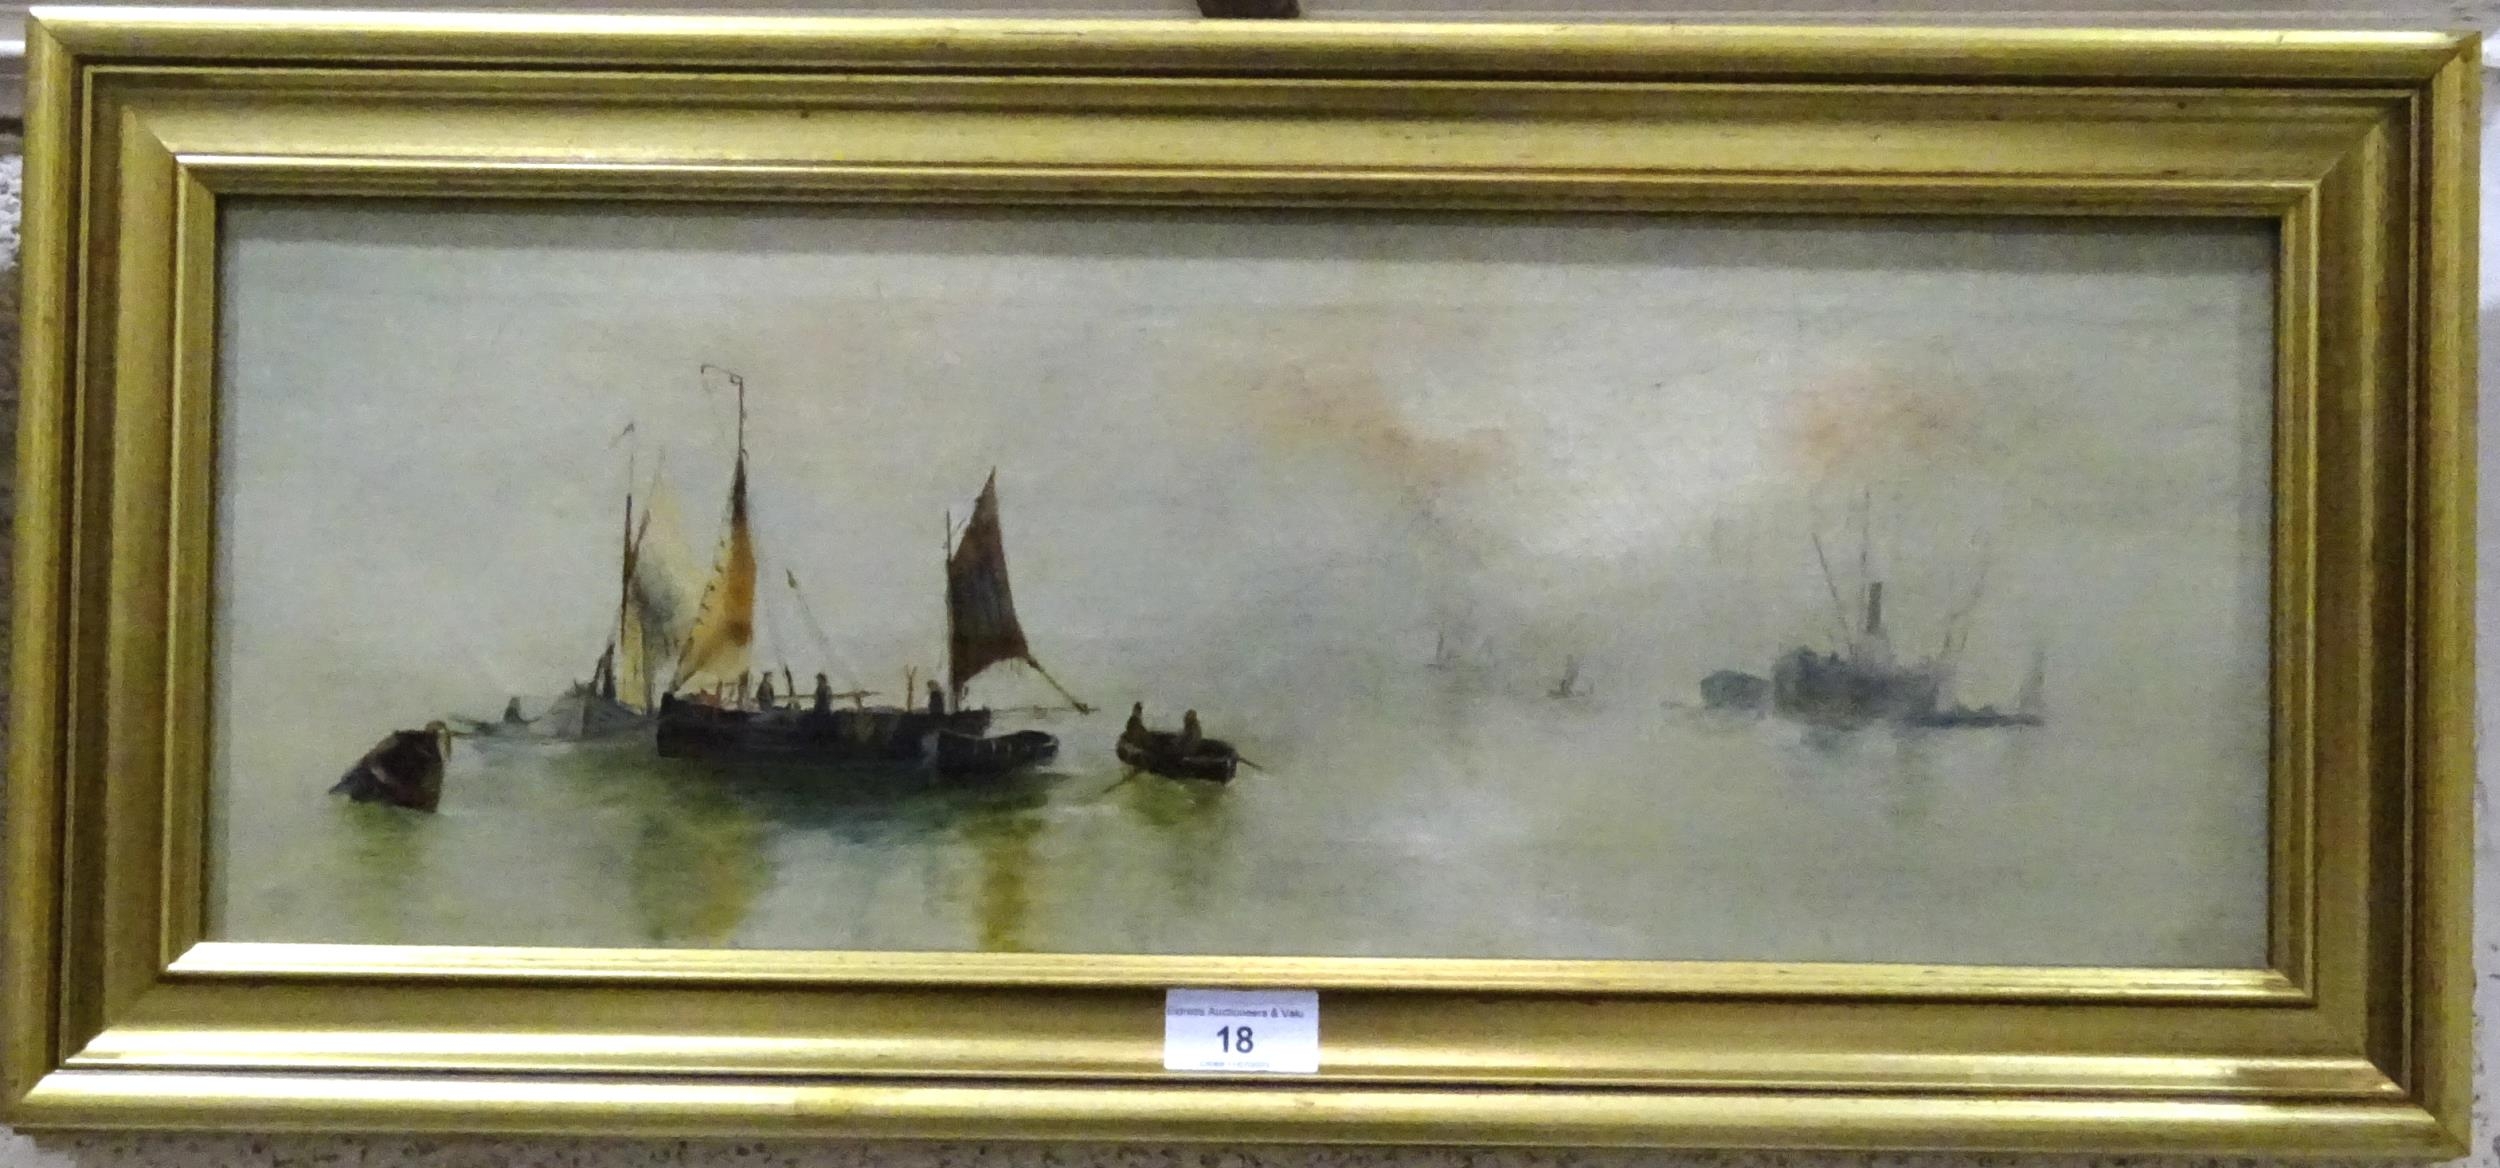 E.E.N, 'Fishing vessels with buoy in foreground', oil on canvas, initialled, 20 x 53.5cm and a - Image 2 of 5